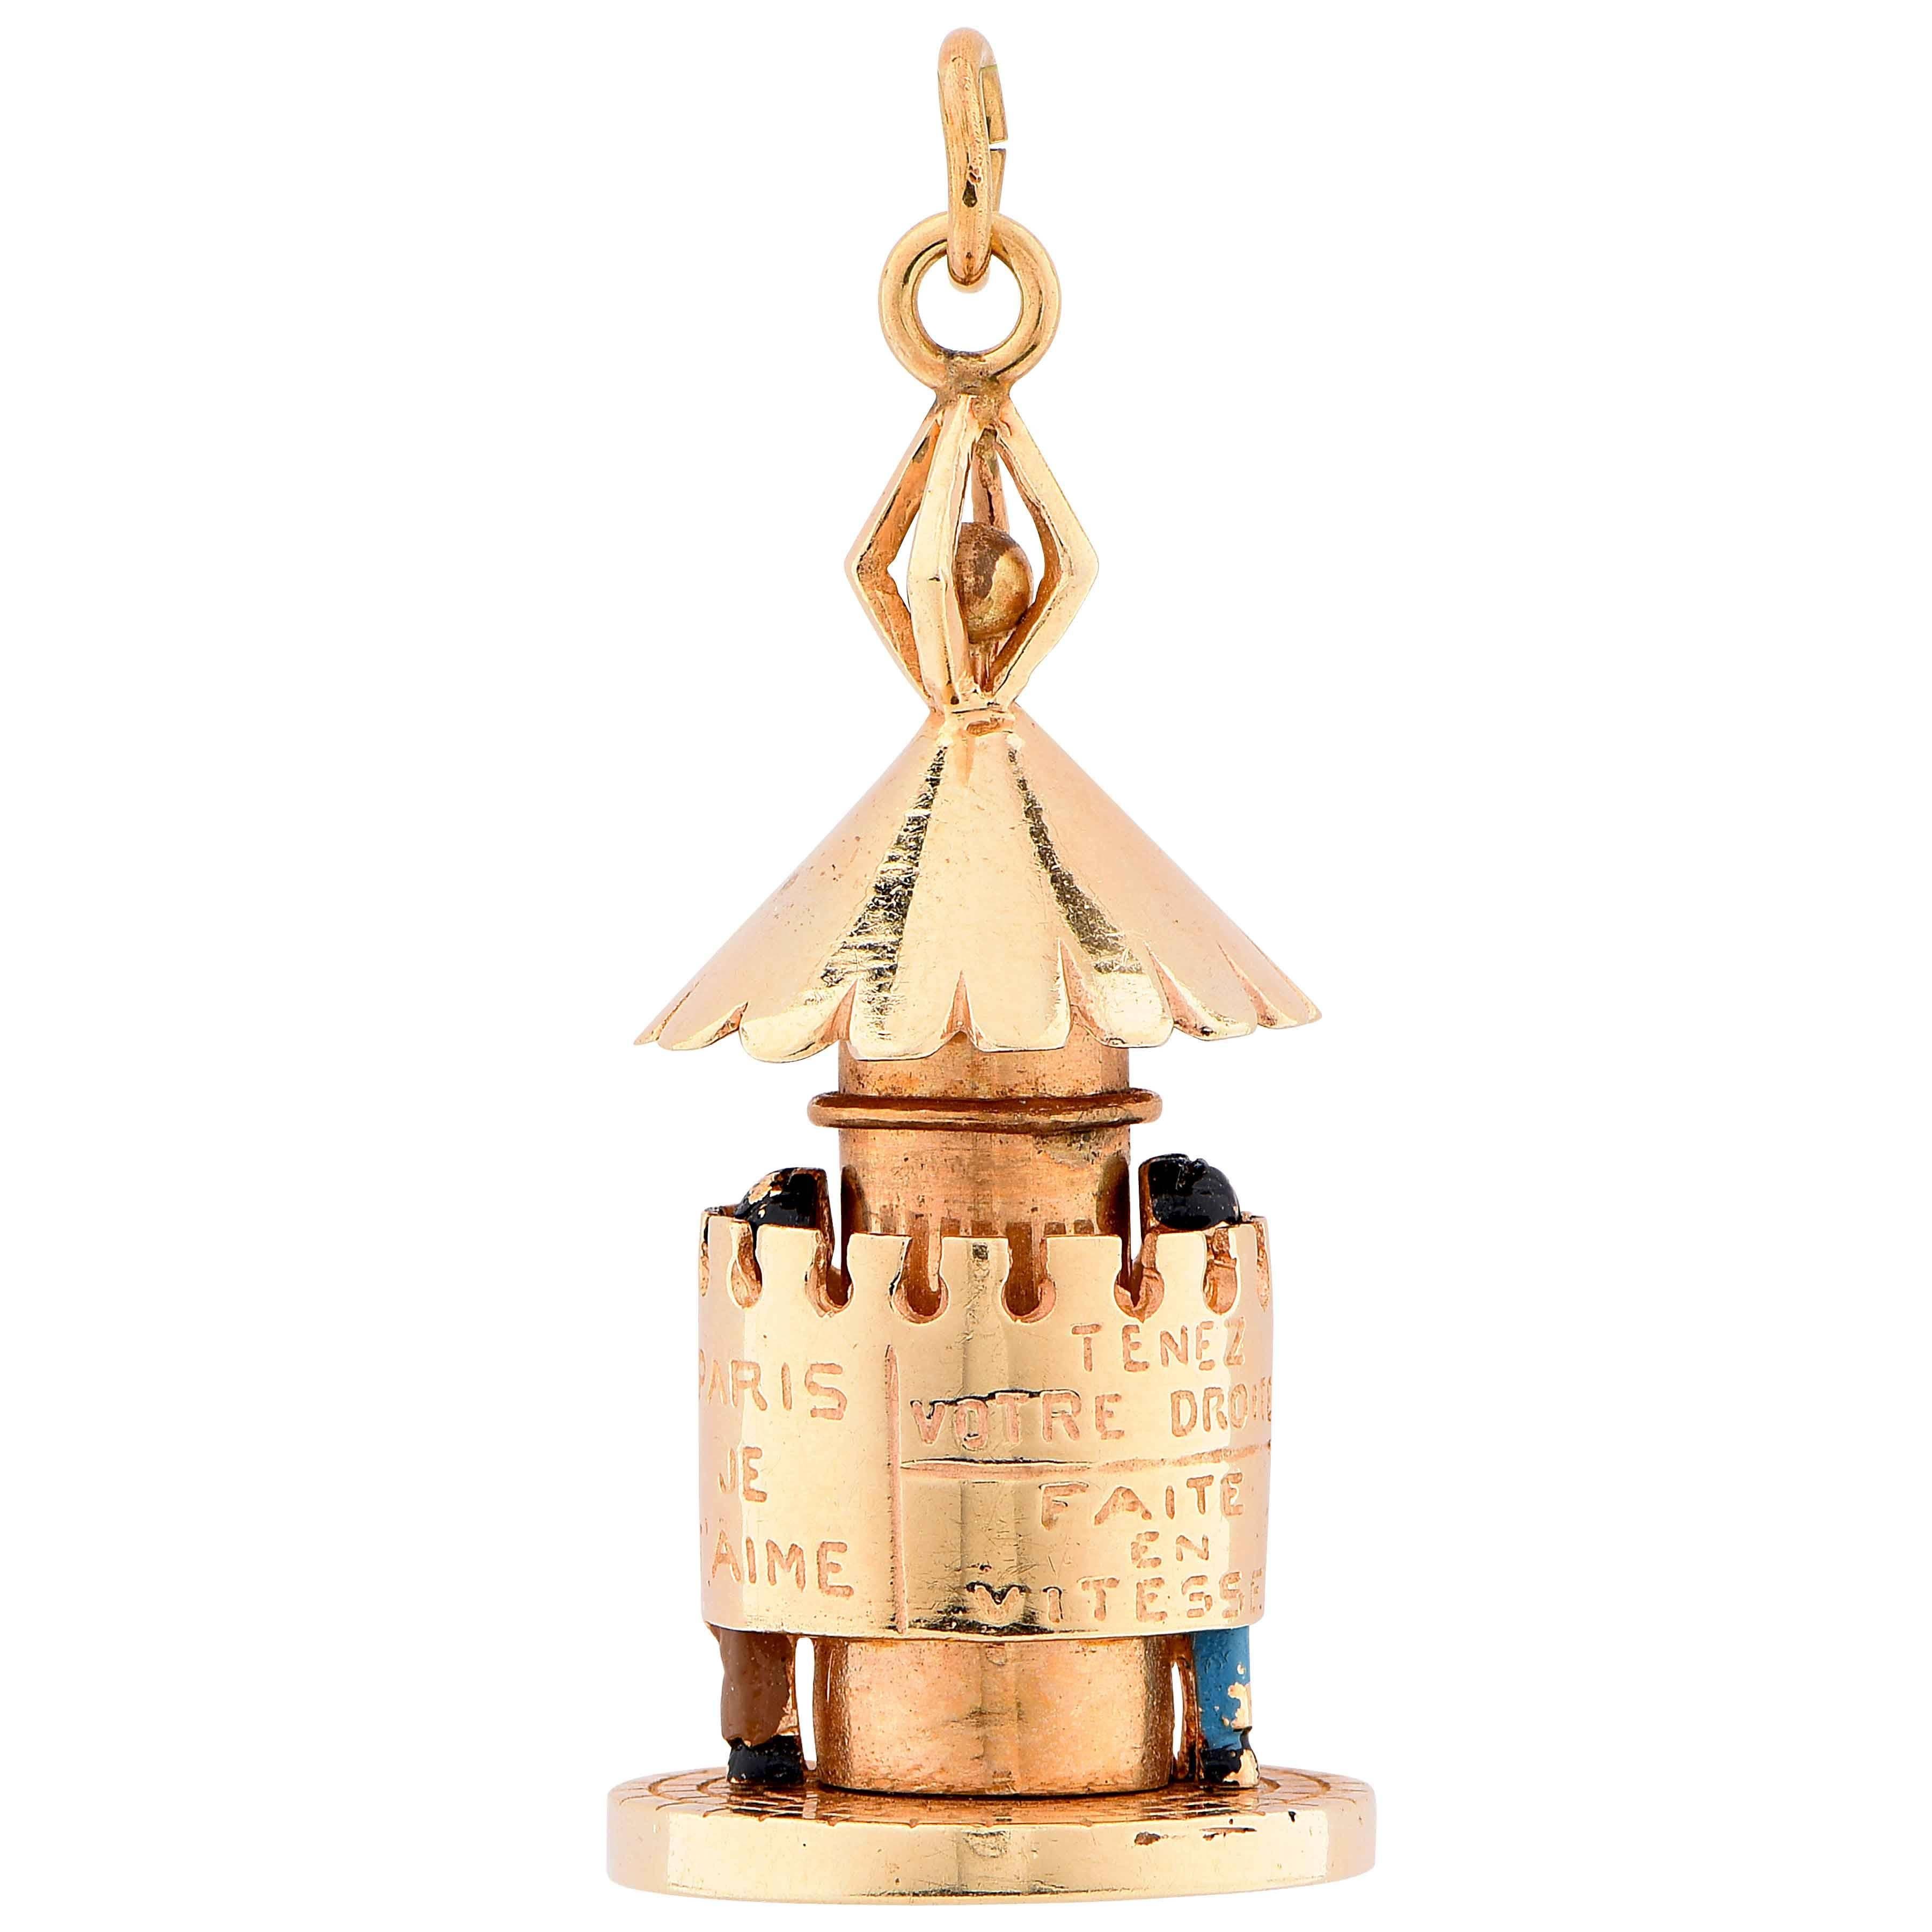 Whimsical pendant with central section that rotates, depicting a classic French street urinal. Etched statements in French on rotating wall. Can be an Objet d'Art.